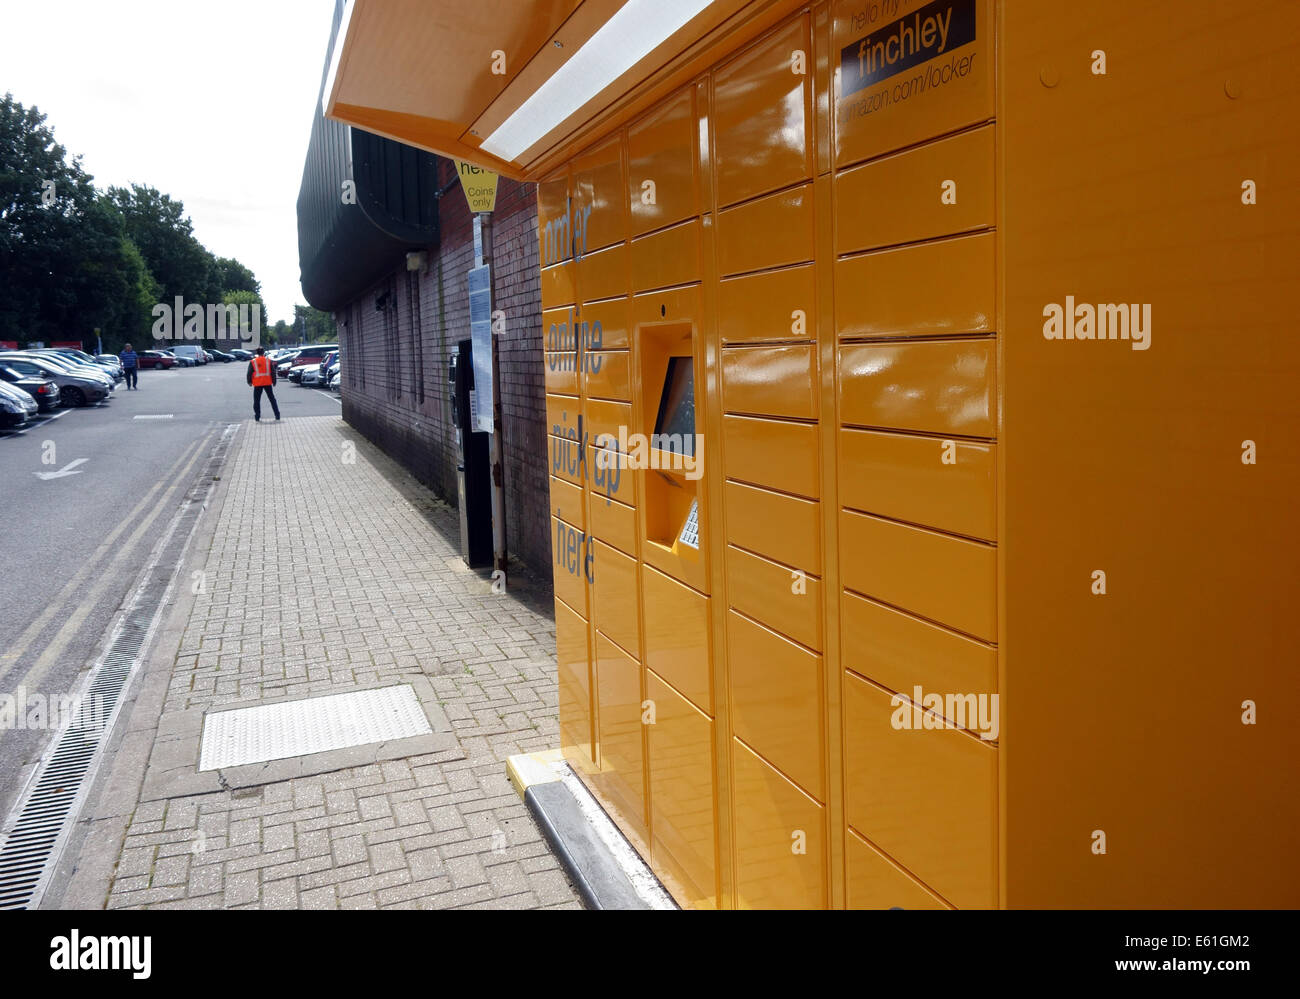 Amazon 'click & collect' lockers at Finchley Central underground station, London Stock Photo